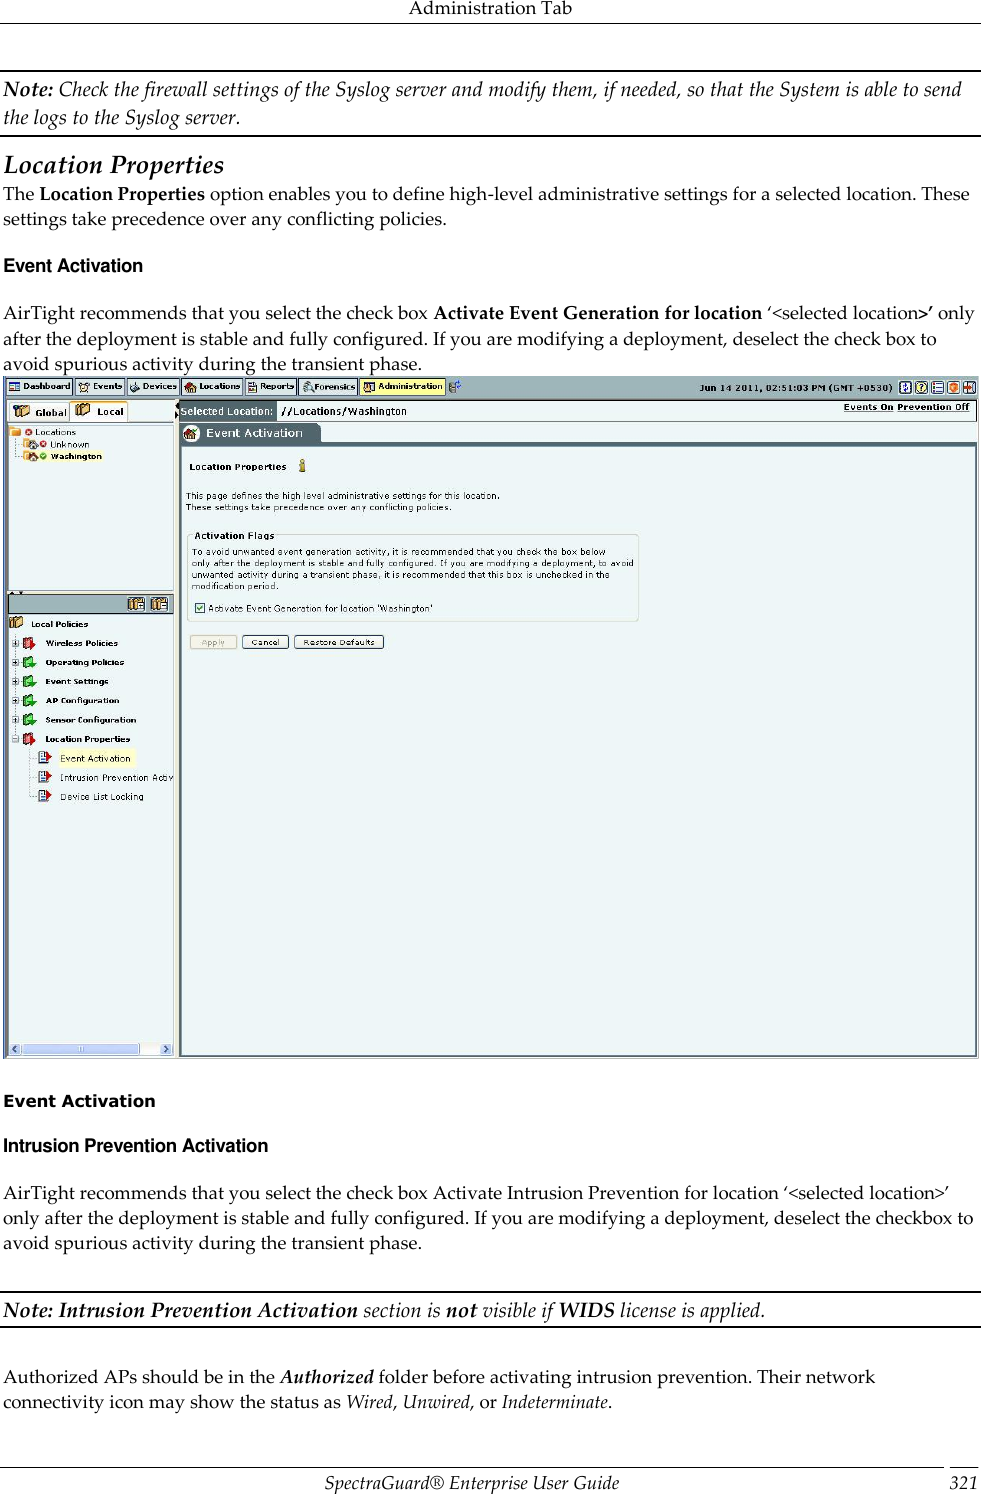 Administration Tab SpectraGuard®  Enterprise User Guide 321 Note: Check the firewall settings of the Syslog server and modify them, if needed, so that the System is able to send the logs to the Syslog server. Location Properties The Location Properties option enables you to define high-level administrative settings for a selected location. These settings take precedence over any conflicting policies. Event Activation AirTight recommends that you select the check box Activate Event Generation for location ‘&lt;selected location&gt;’ only after the deployment is stable and fully configured. If you are modifying a deployment, deselect the check box to avoid spurious activity during the transient phase.    Event Activation Intrusion Prevention Activation AirTight recommends that you select the check box Activate Intrusion Prevention for location ‘&lt;selected location&gt;’ only after the deployment is stable and fully configured. If you are modifying a deployment, deselect the checkbox to avoid spurious activity during the transient phase.   Note: Intrusion Prevention Activation section is not visible if WIDS license is applied.   Authorized APs should be in the Authorized folder before activating intrusion prevention. Their network connectivity icon may show the status as Wired, Unwired, or Indeterminate. 